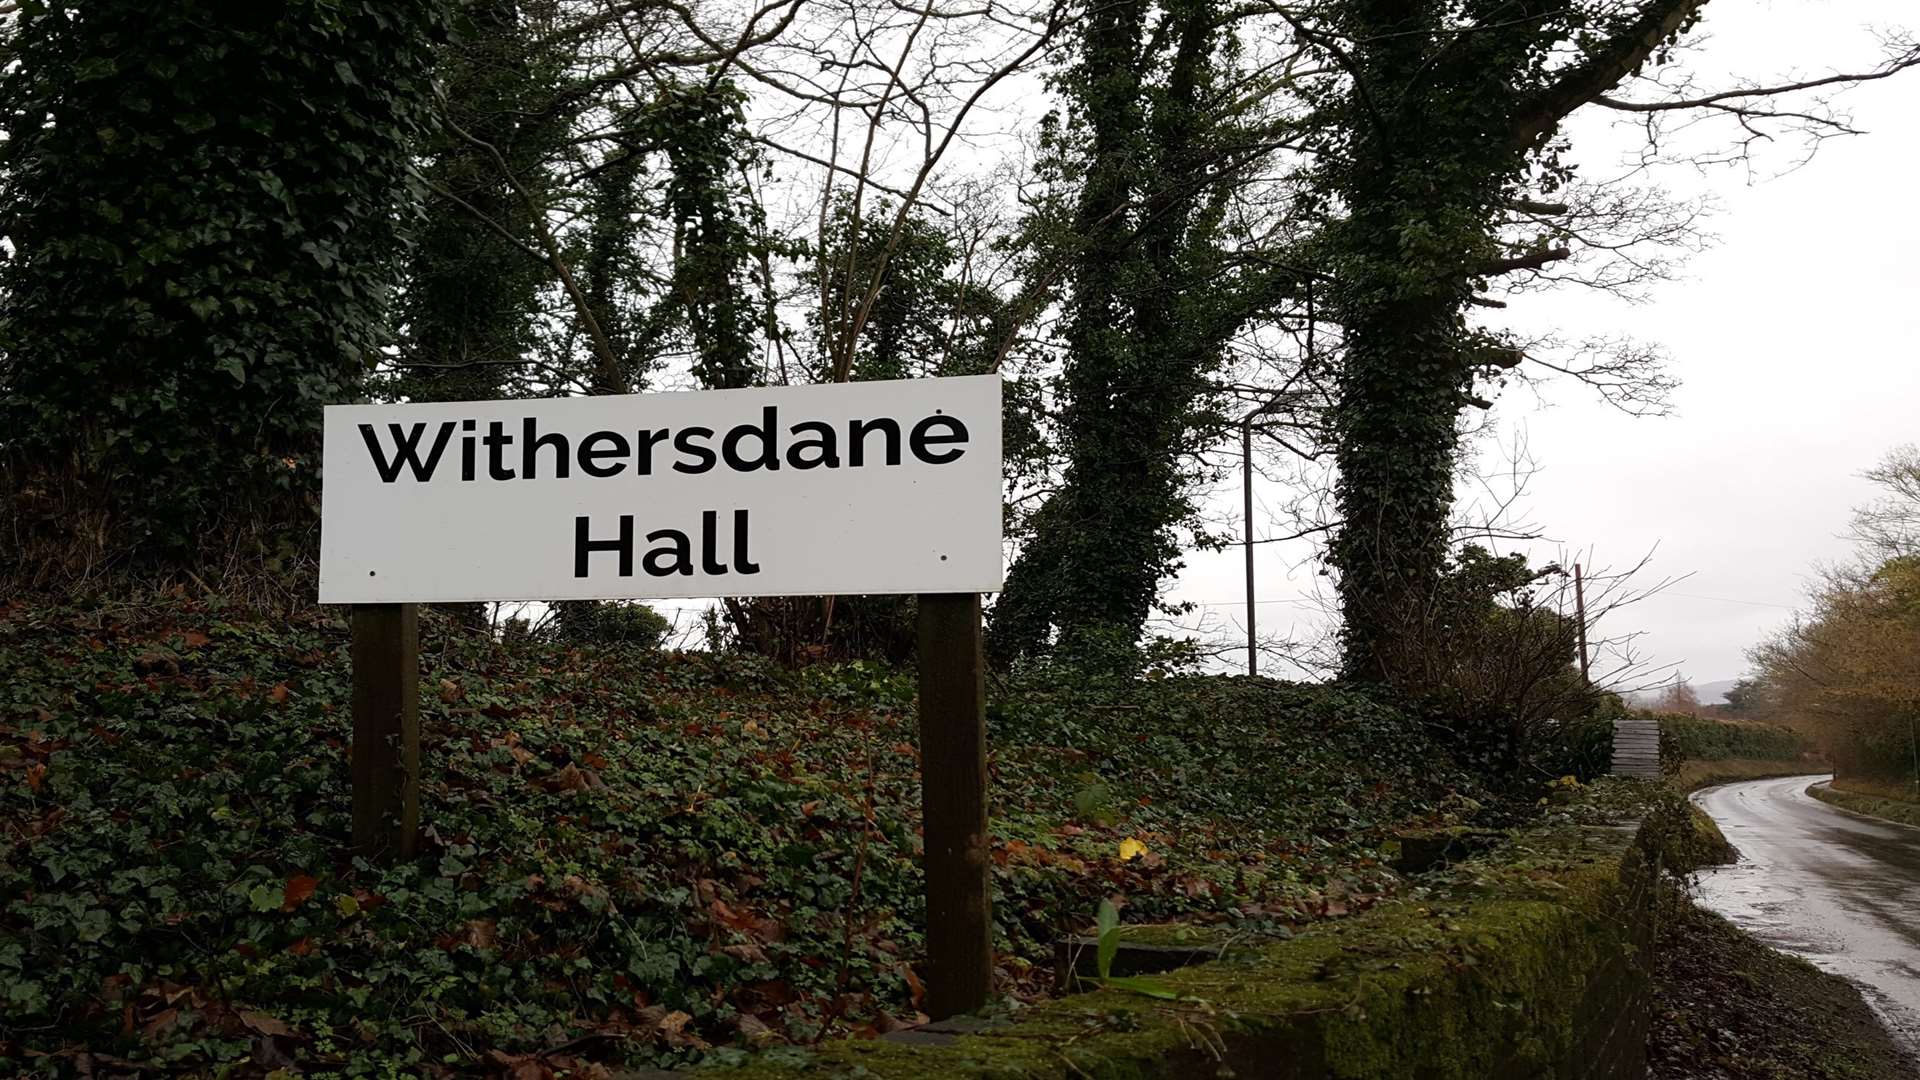 Withersdane Hall in Wye